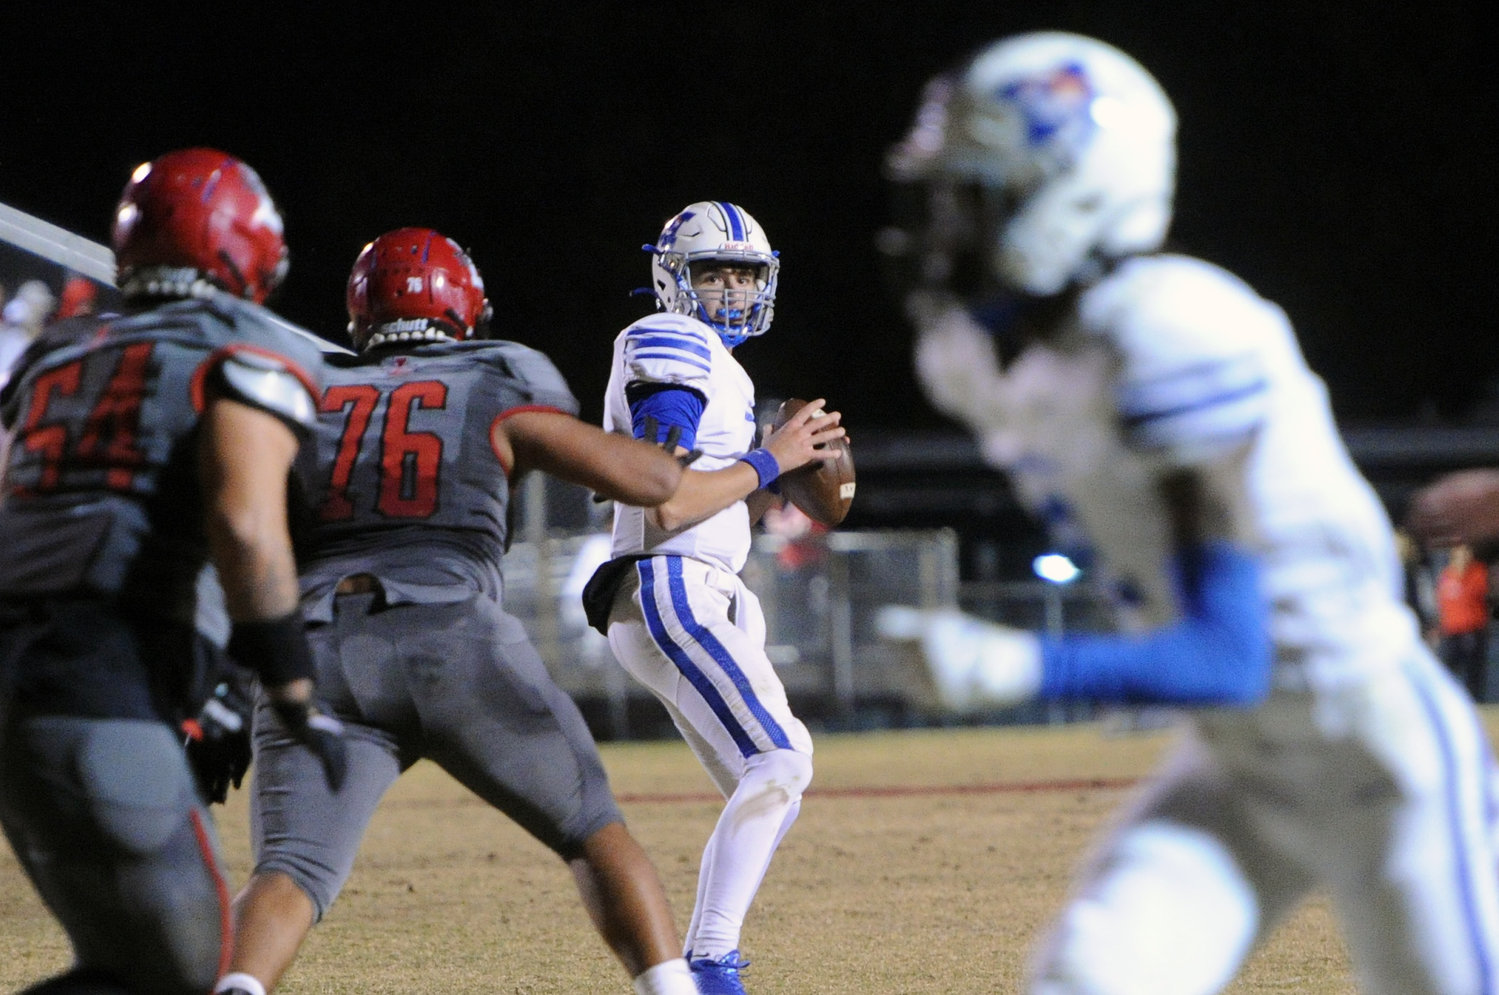 Silas Teat stands tall in the pocket and keeps his eyes downfield.